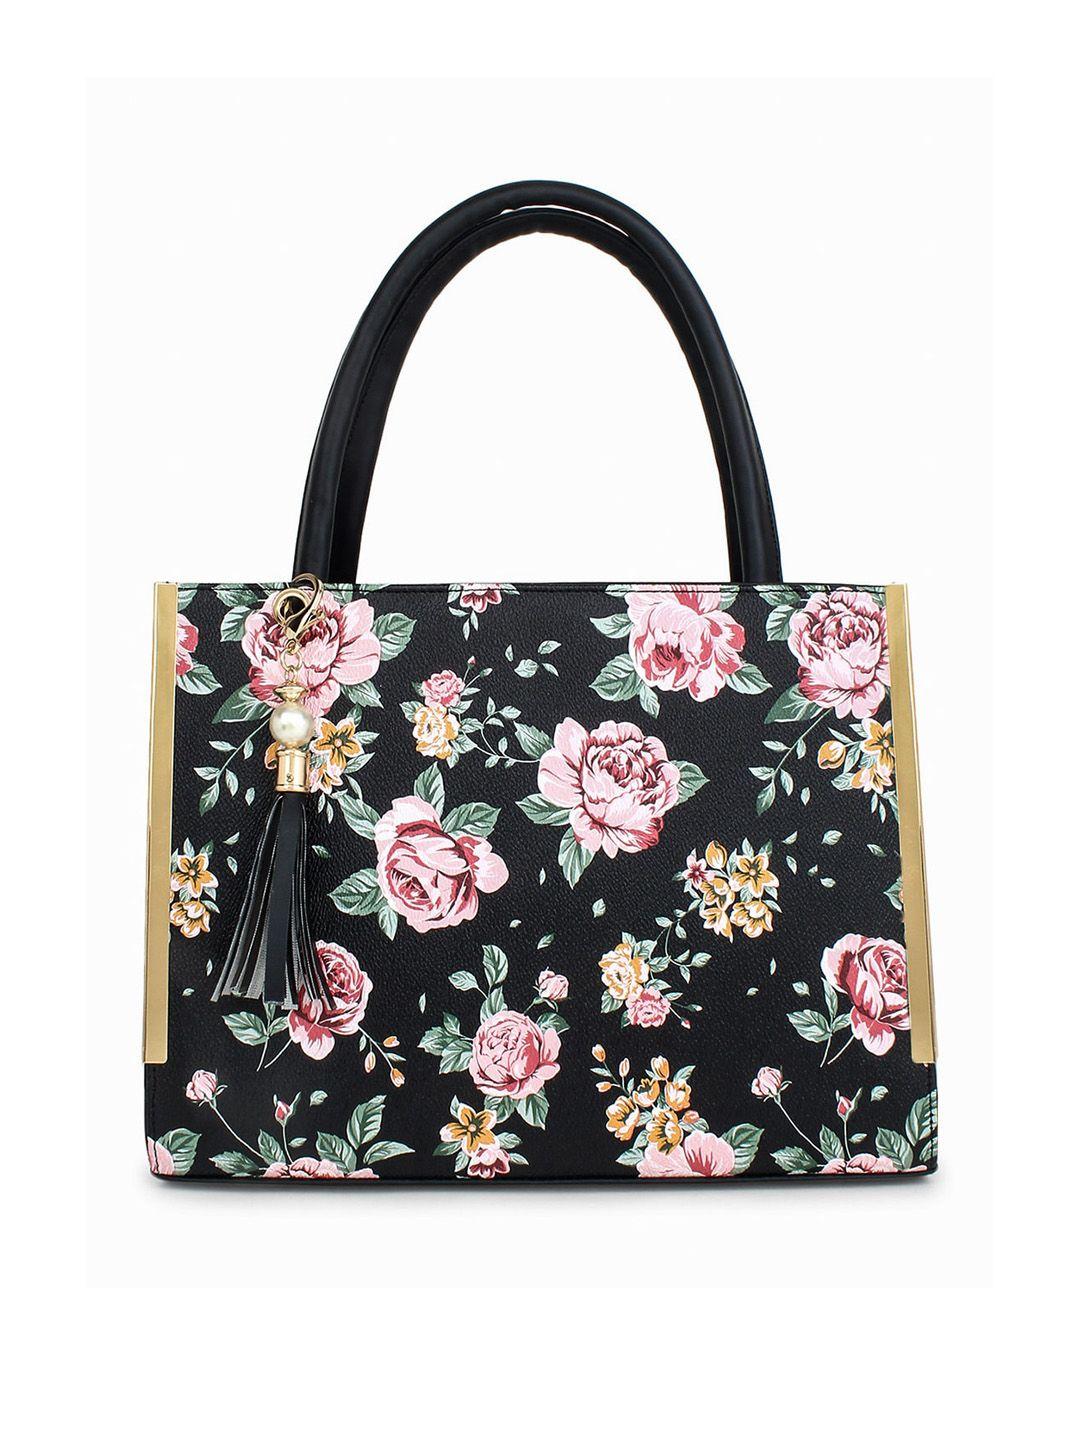 legal bribe floral printed oversized shopper tote bag with tasselled